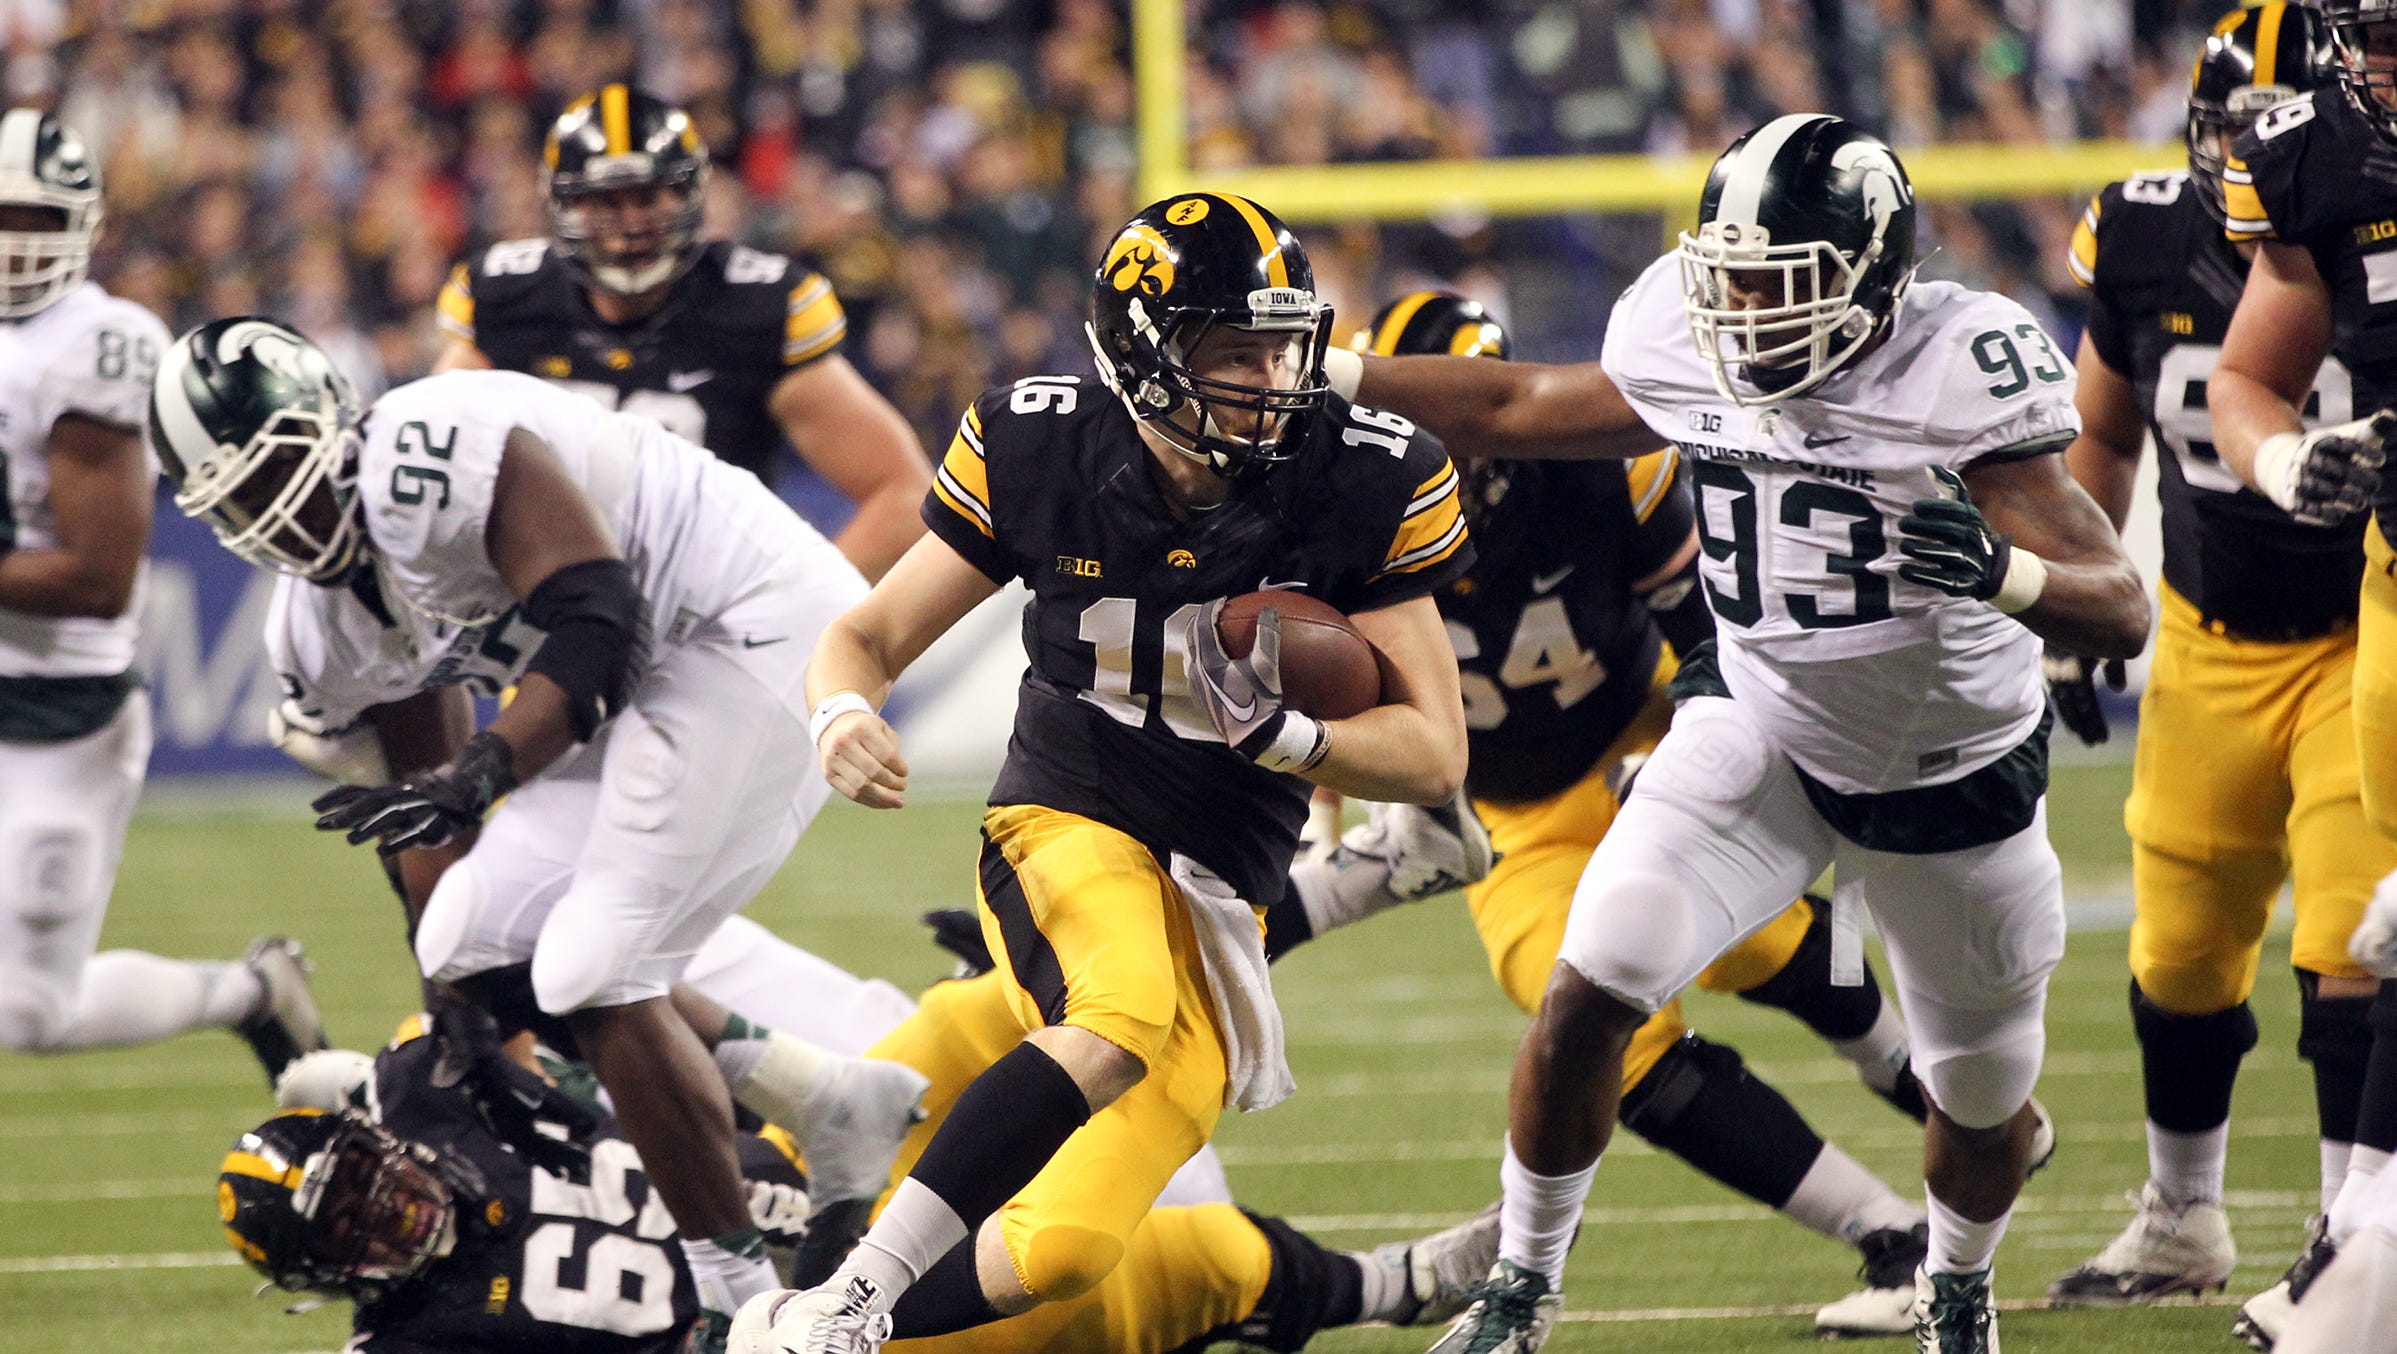 Iowa quarterback C.J. Beathard runs down field during the Hawkeyes' Big Ten Championship game against Michigan State at Lucas Oil Stadium in Indianapolis, Ind. on Saturday, Dec. 5, 2015.